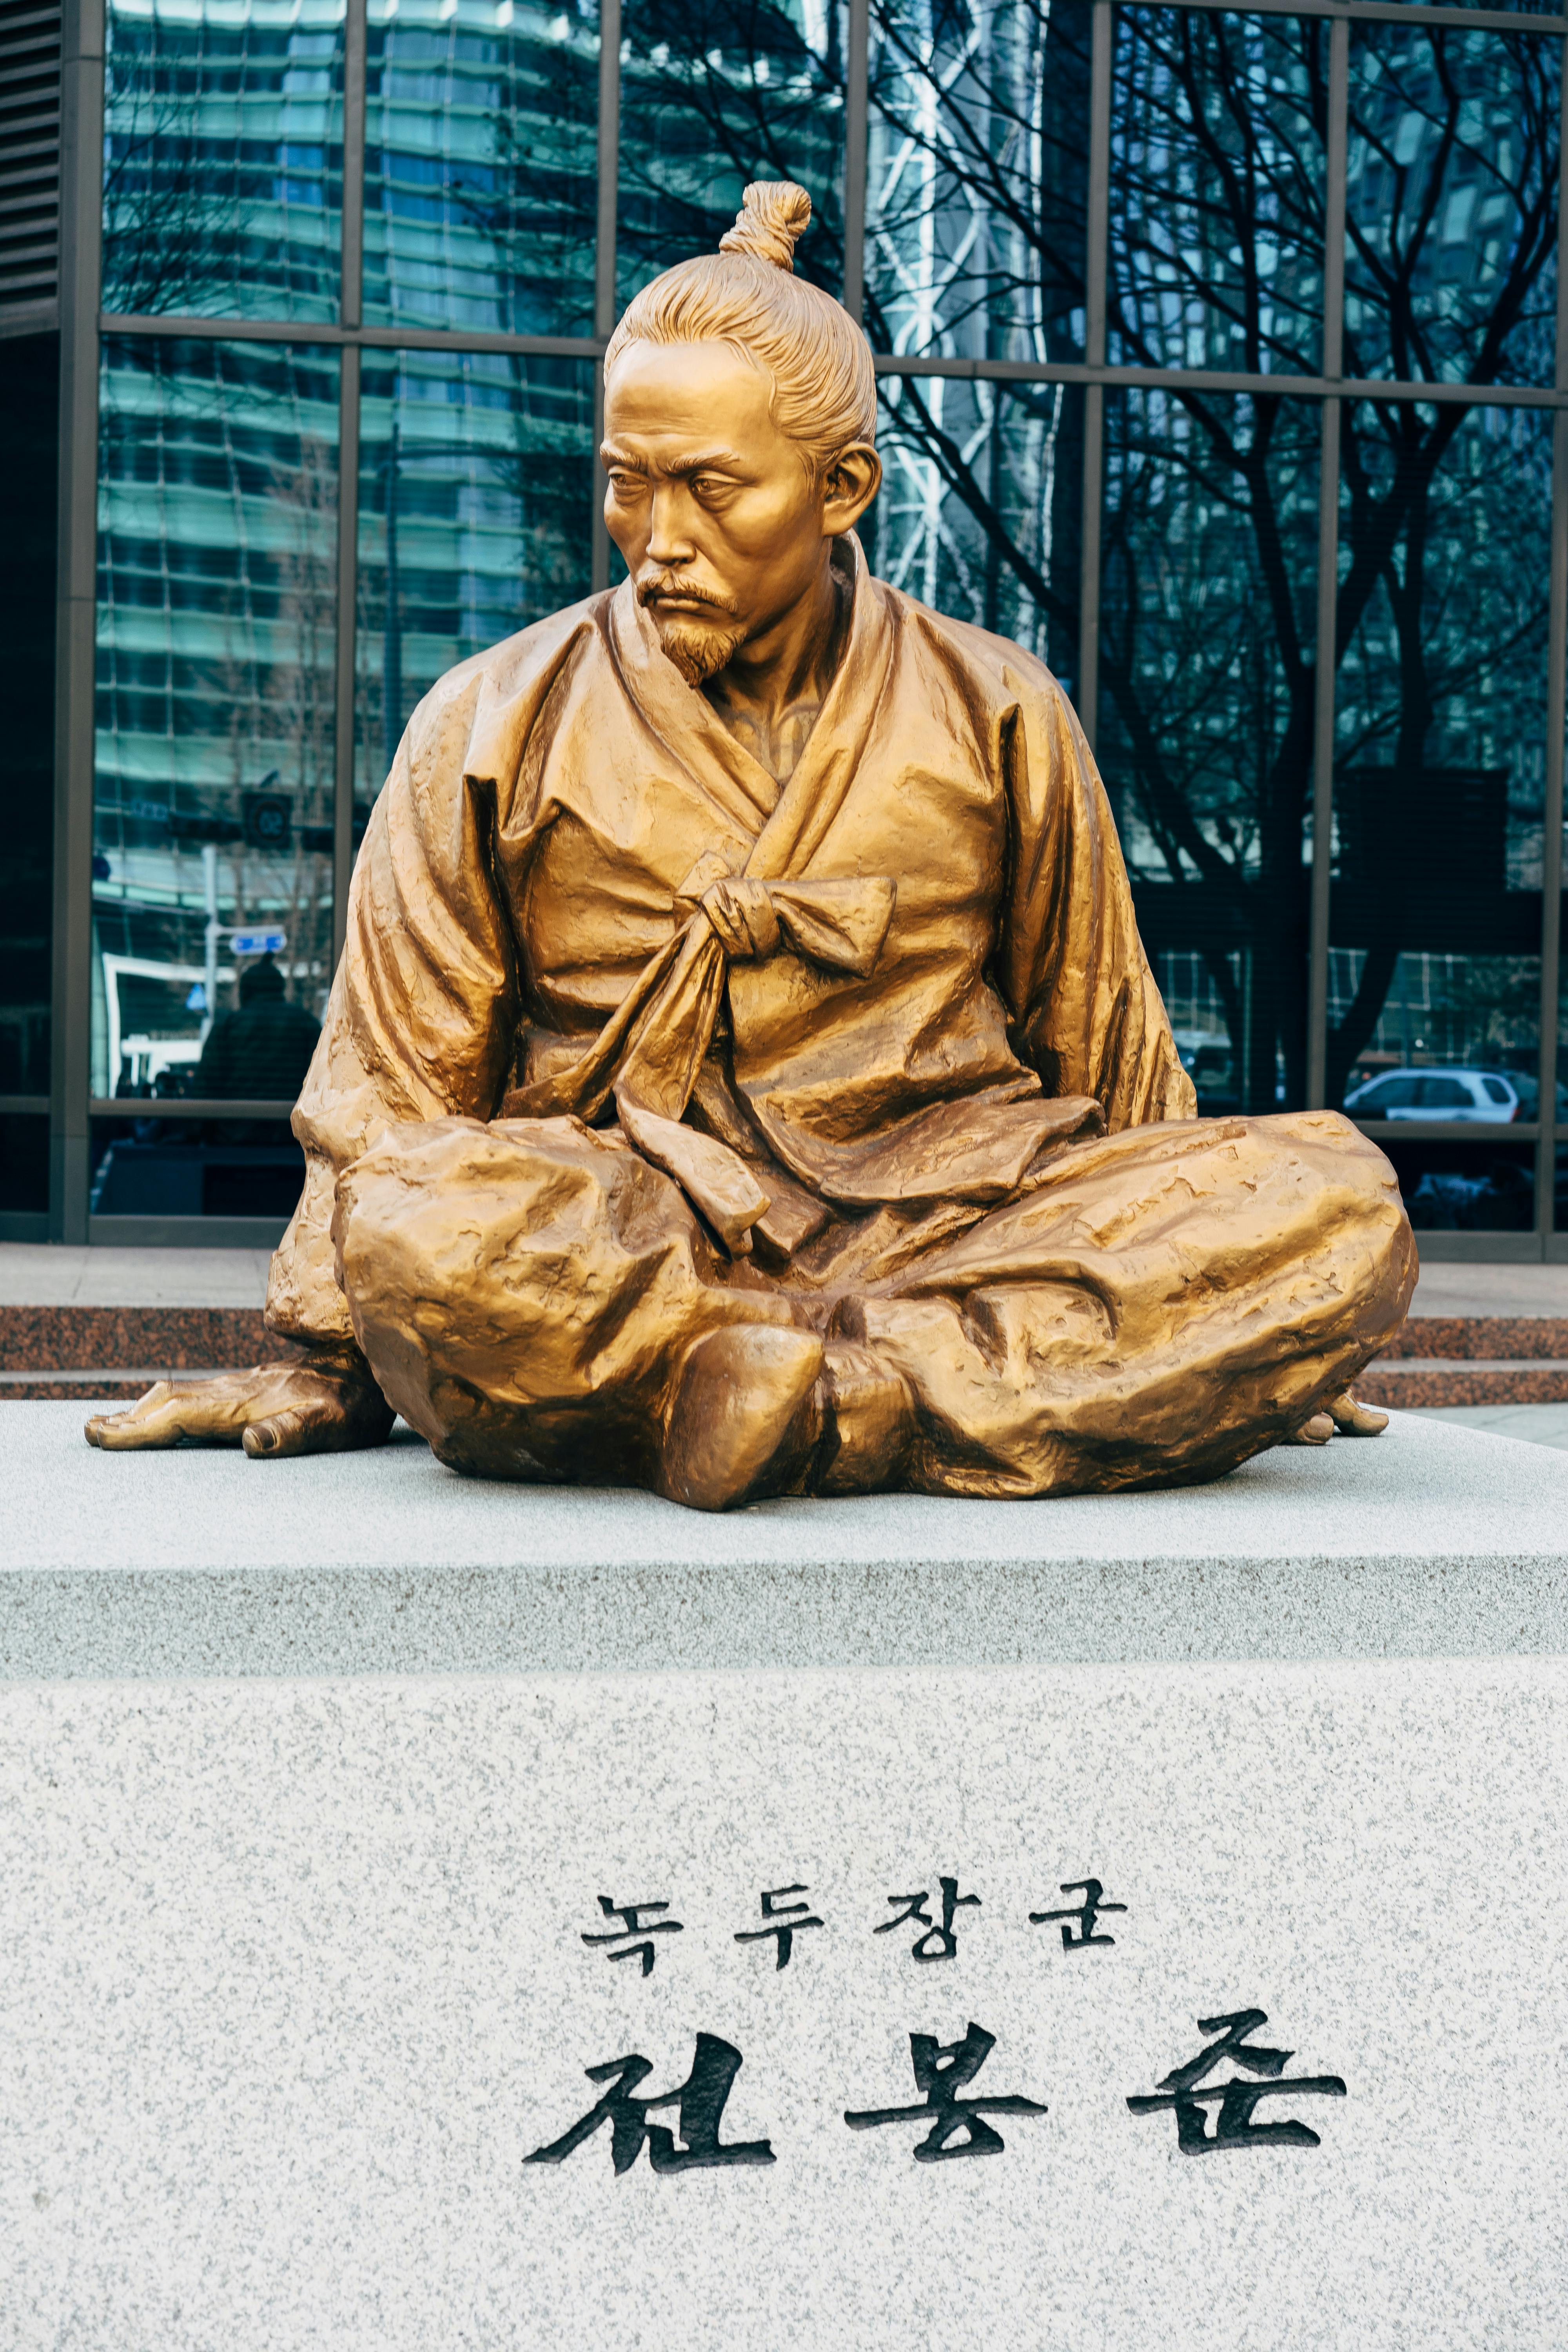 man in brown robe sitting on concrete bench